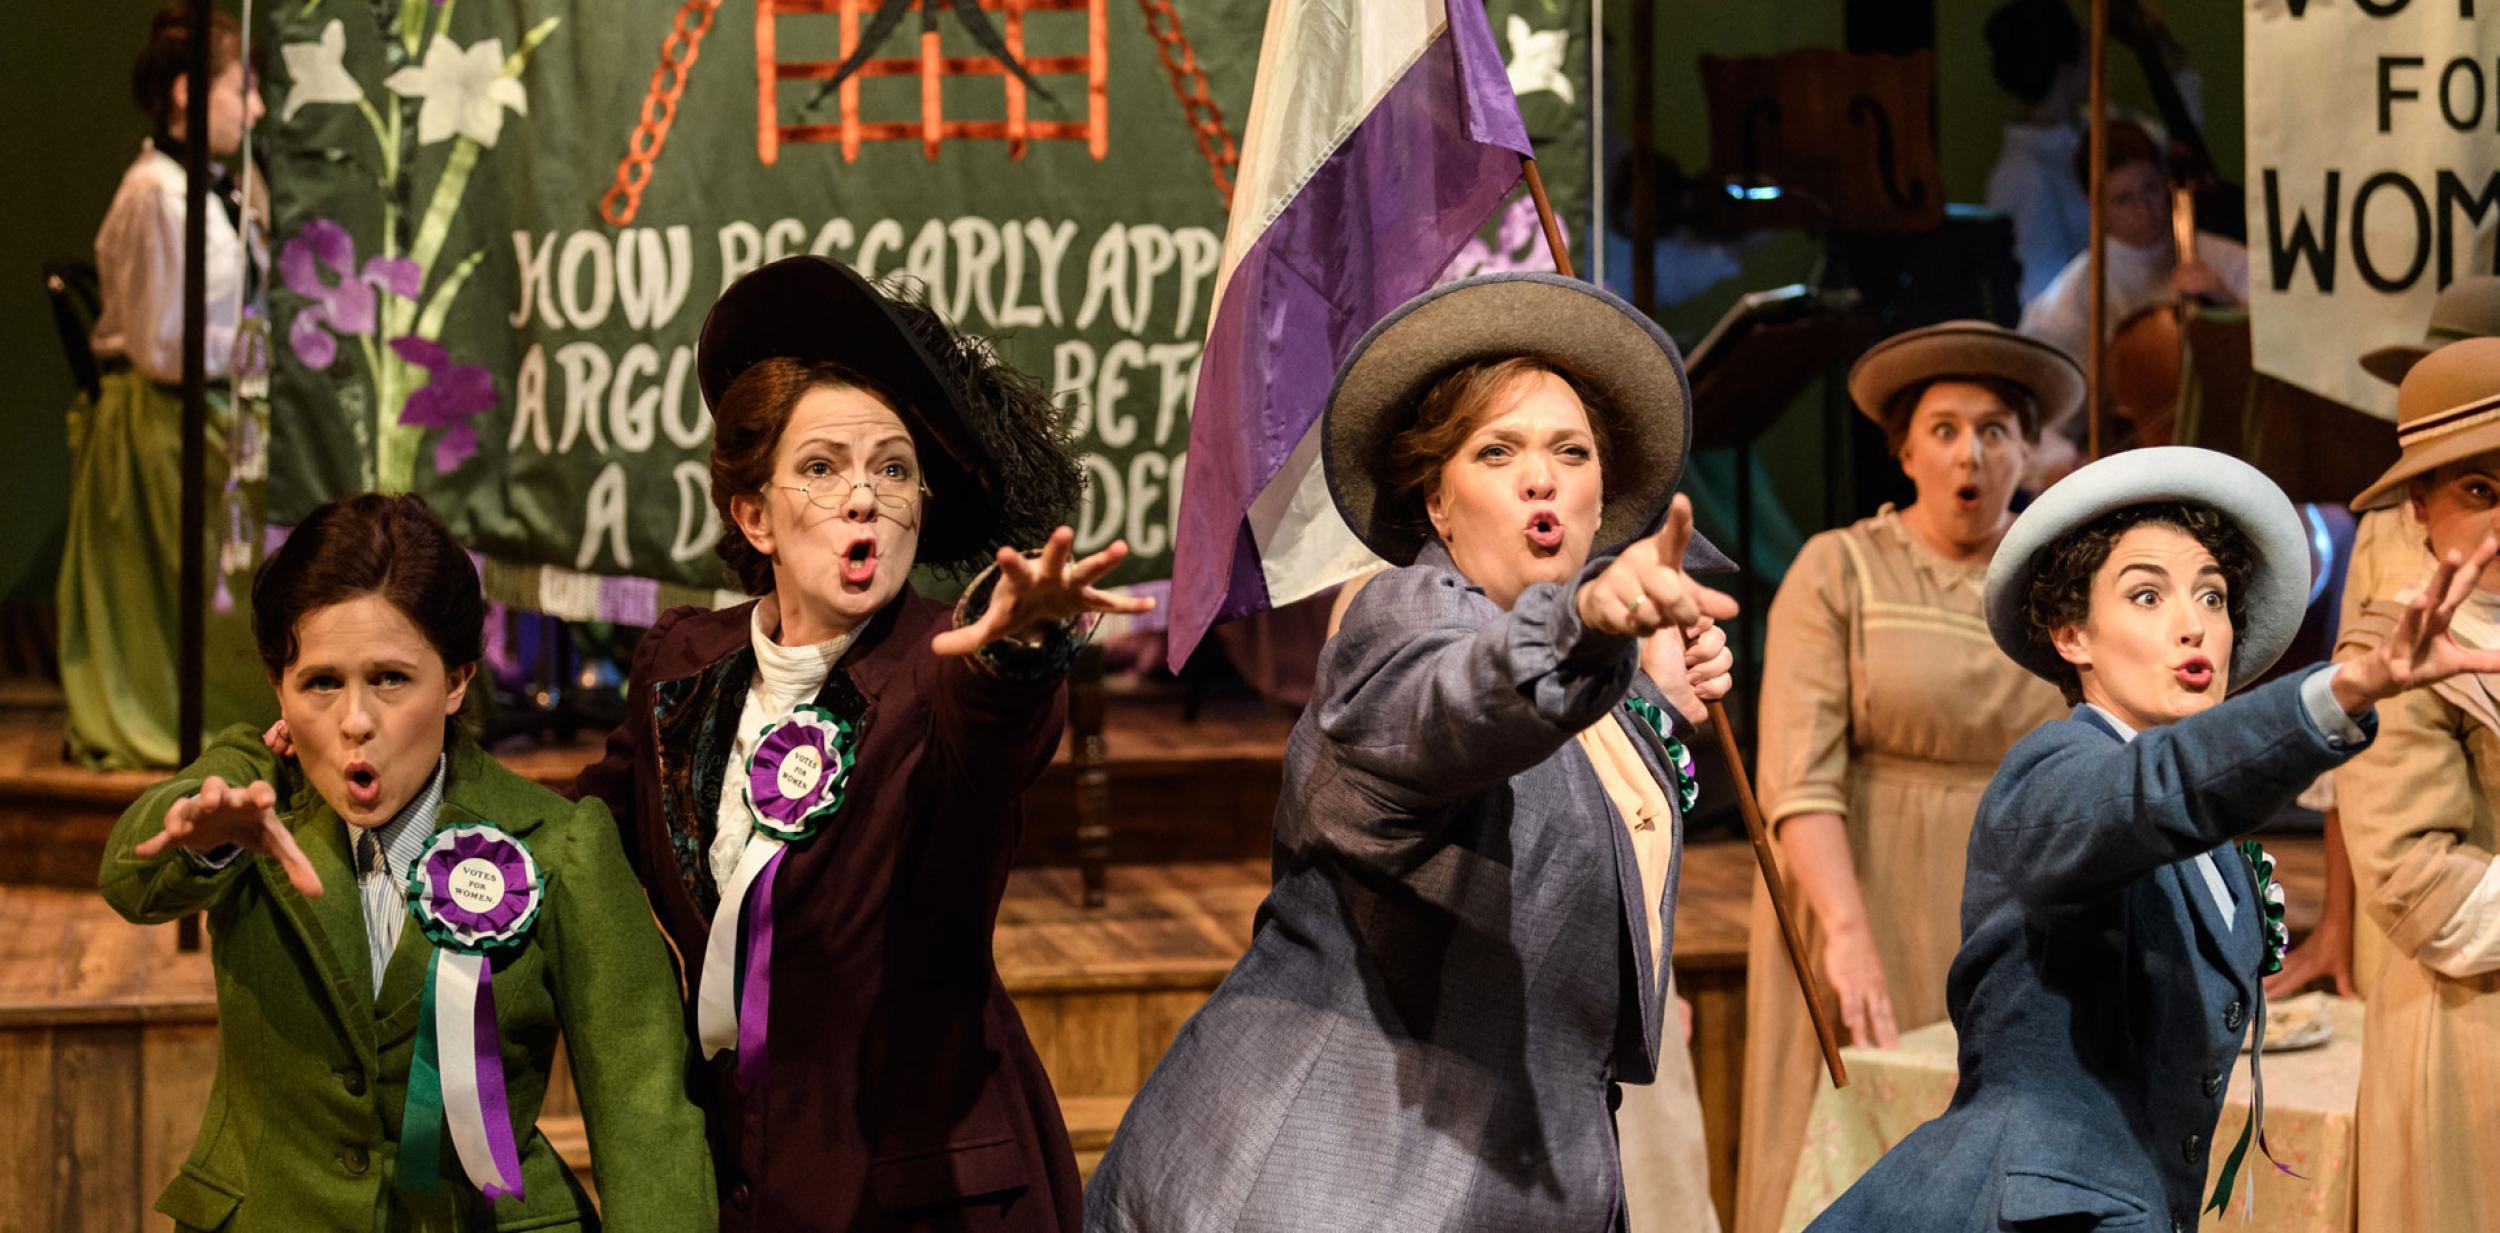 Suffragette characters from the opera, Rhondda rips it up, pointing out to the audience.